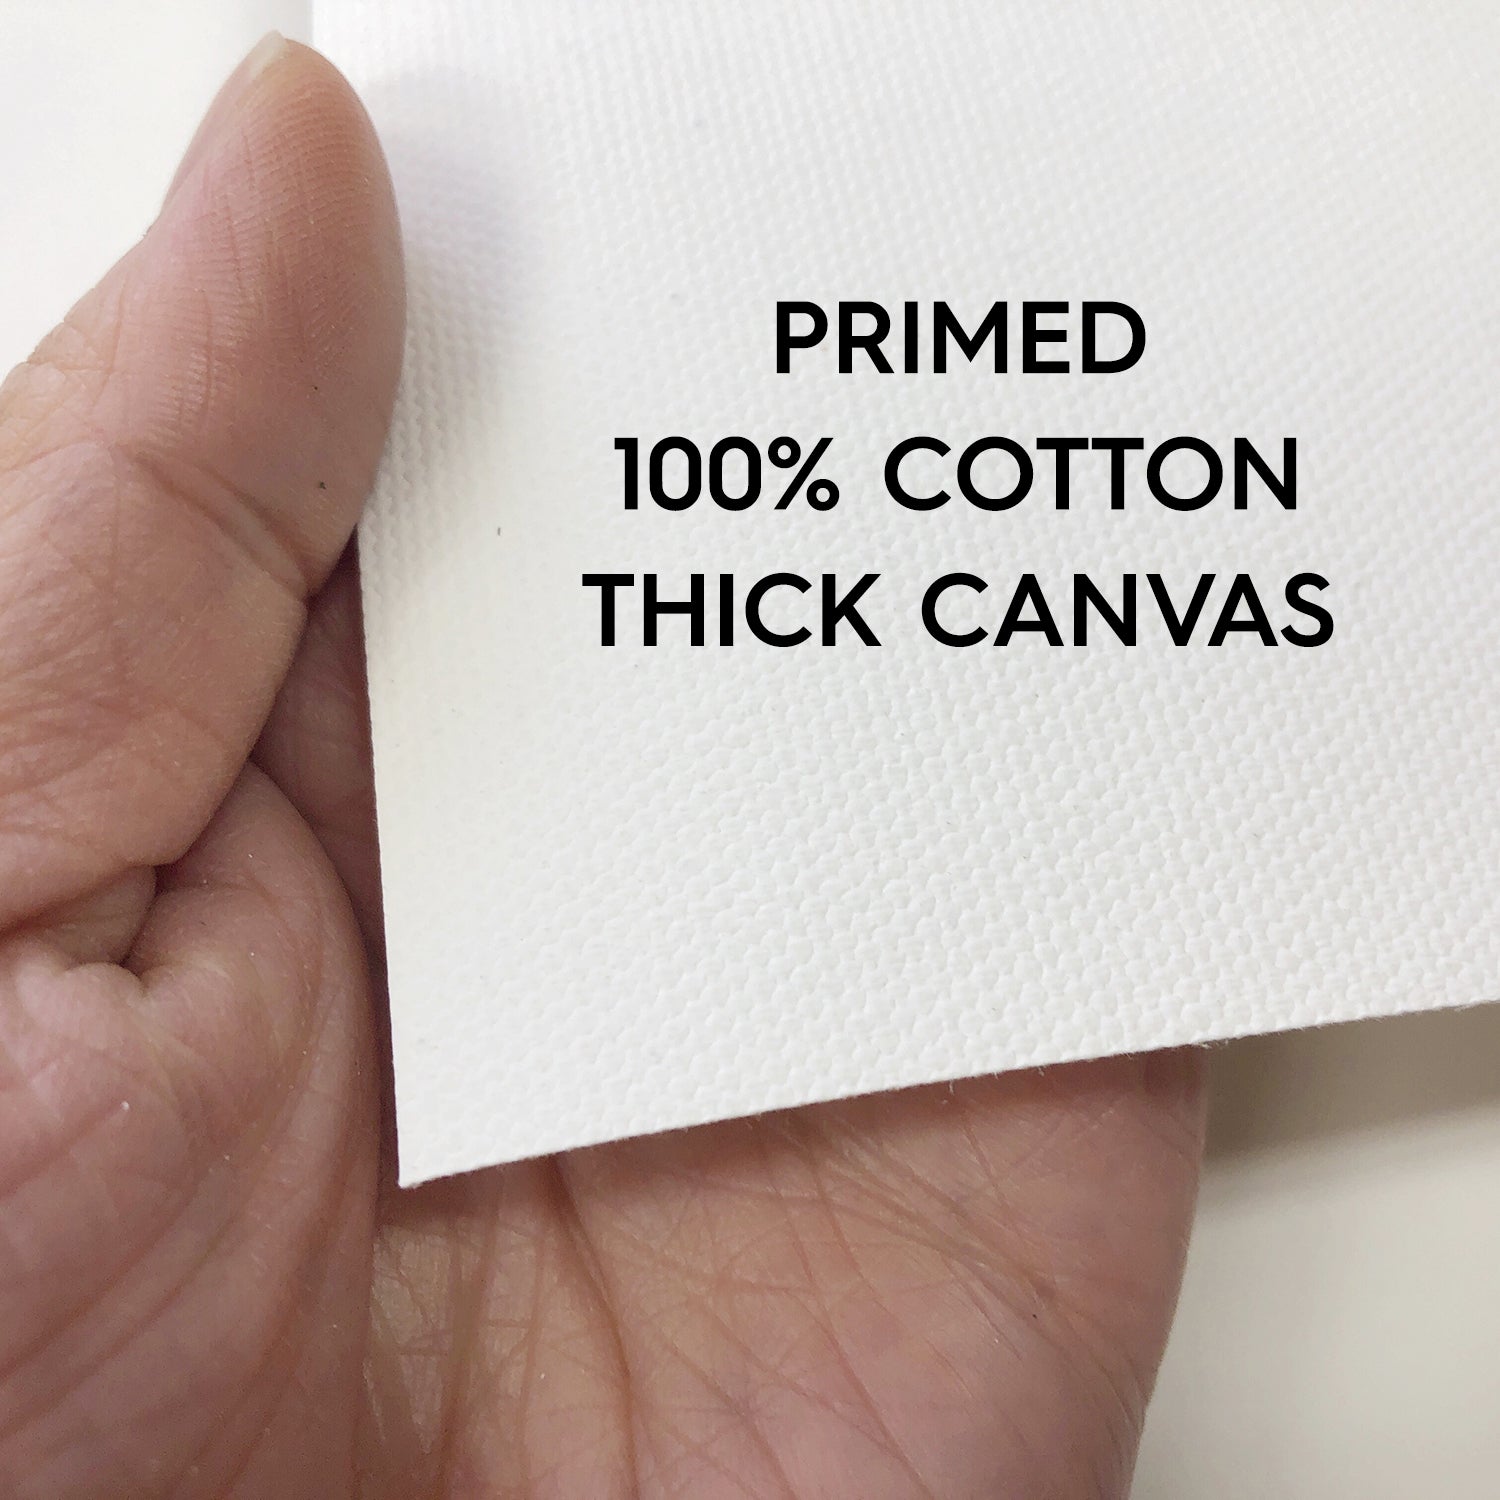 11x14 Canvas Blanks for Painting - Flat Unstretched 100% Cotton